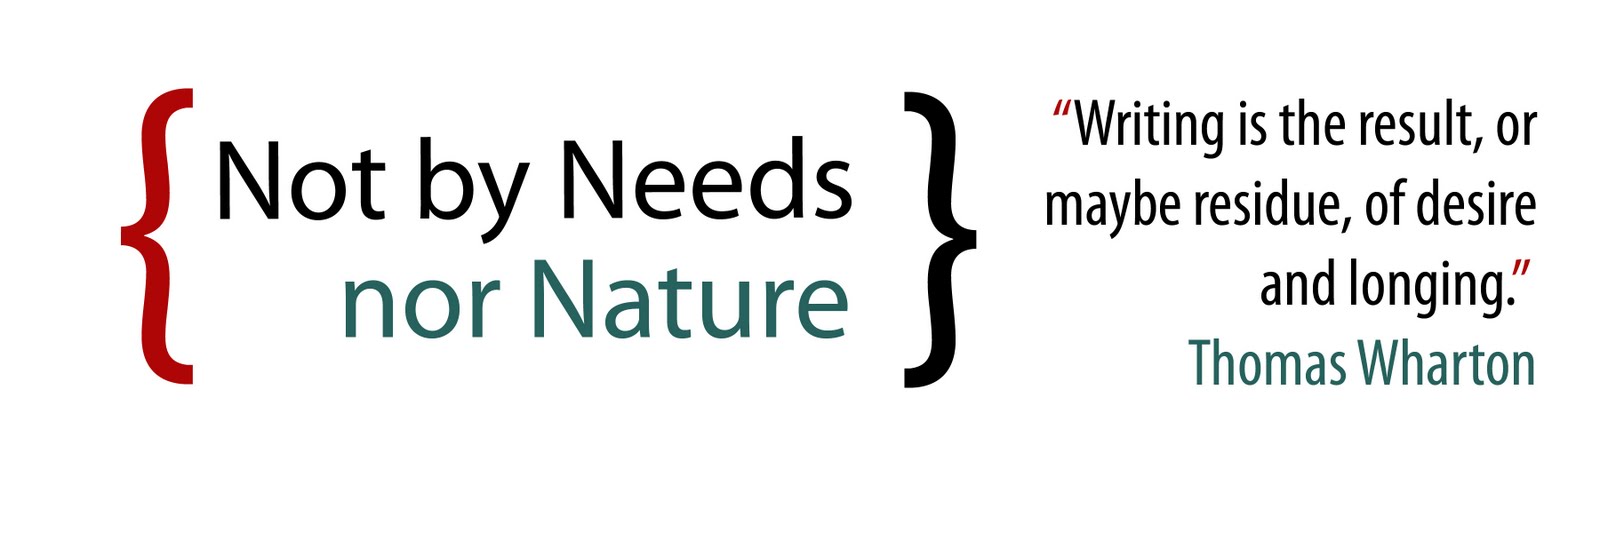 {Not by Needs nor Nature}